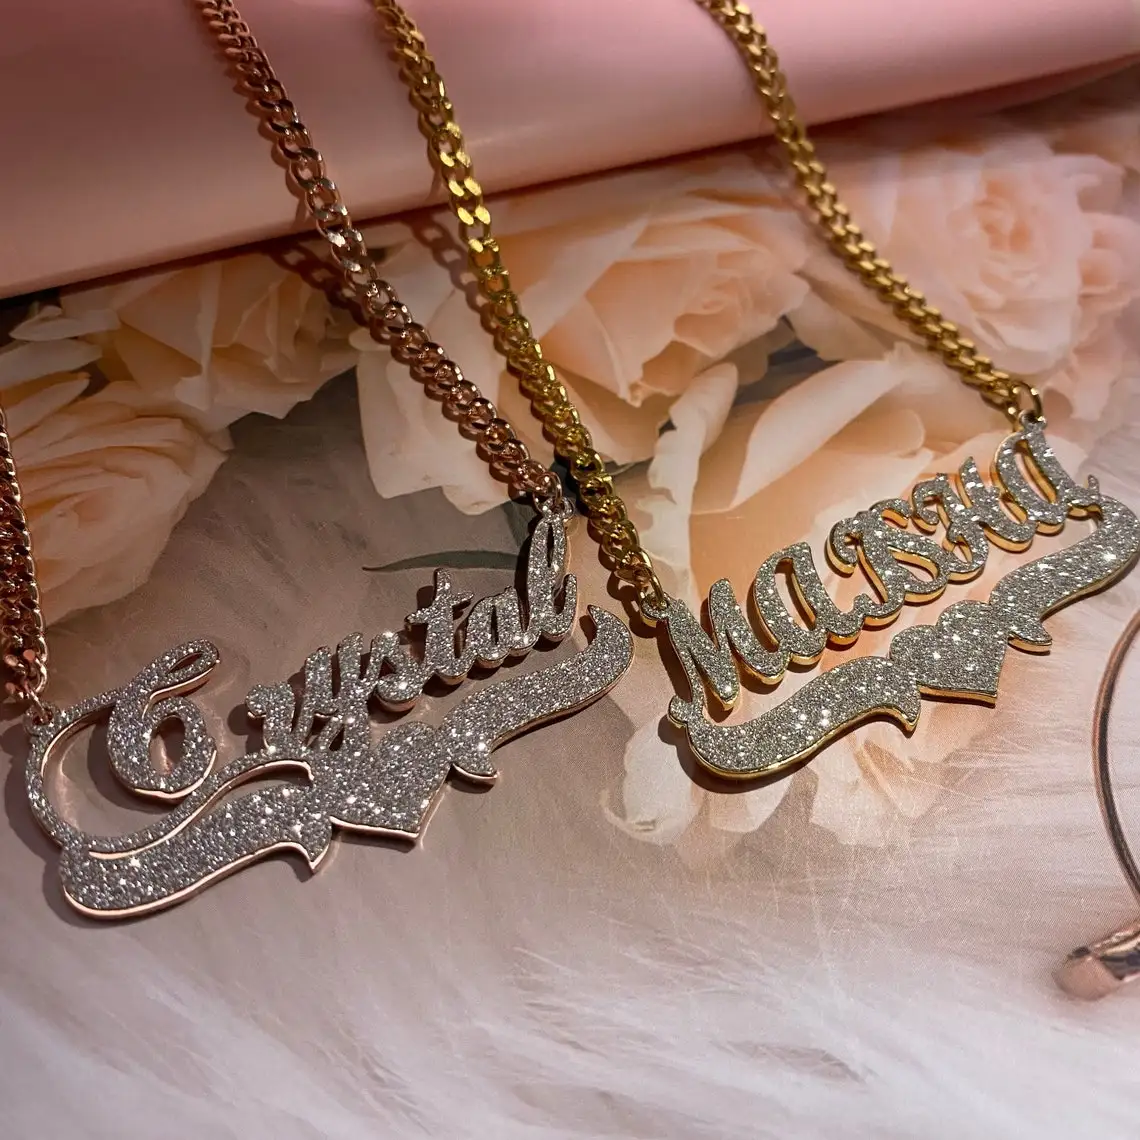 Personalized Name Necklace Custom Bling Name Necklaces Gold Stainless Steel Cuban Chain Choker for Women Necklace Jewelry Gift